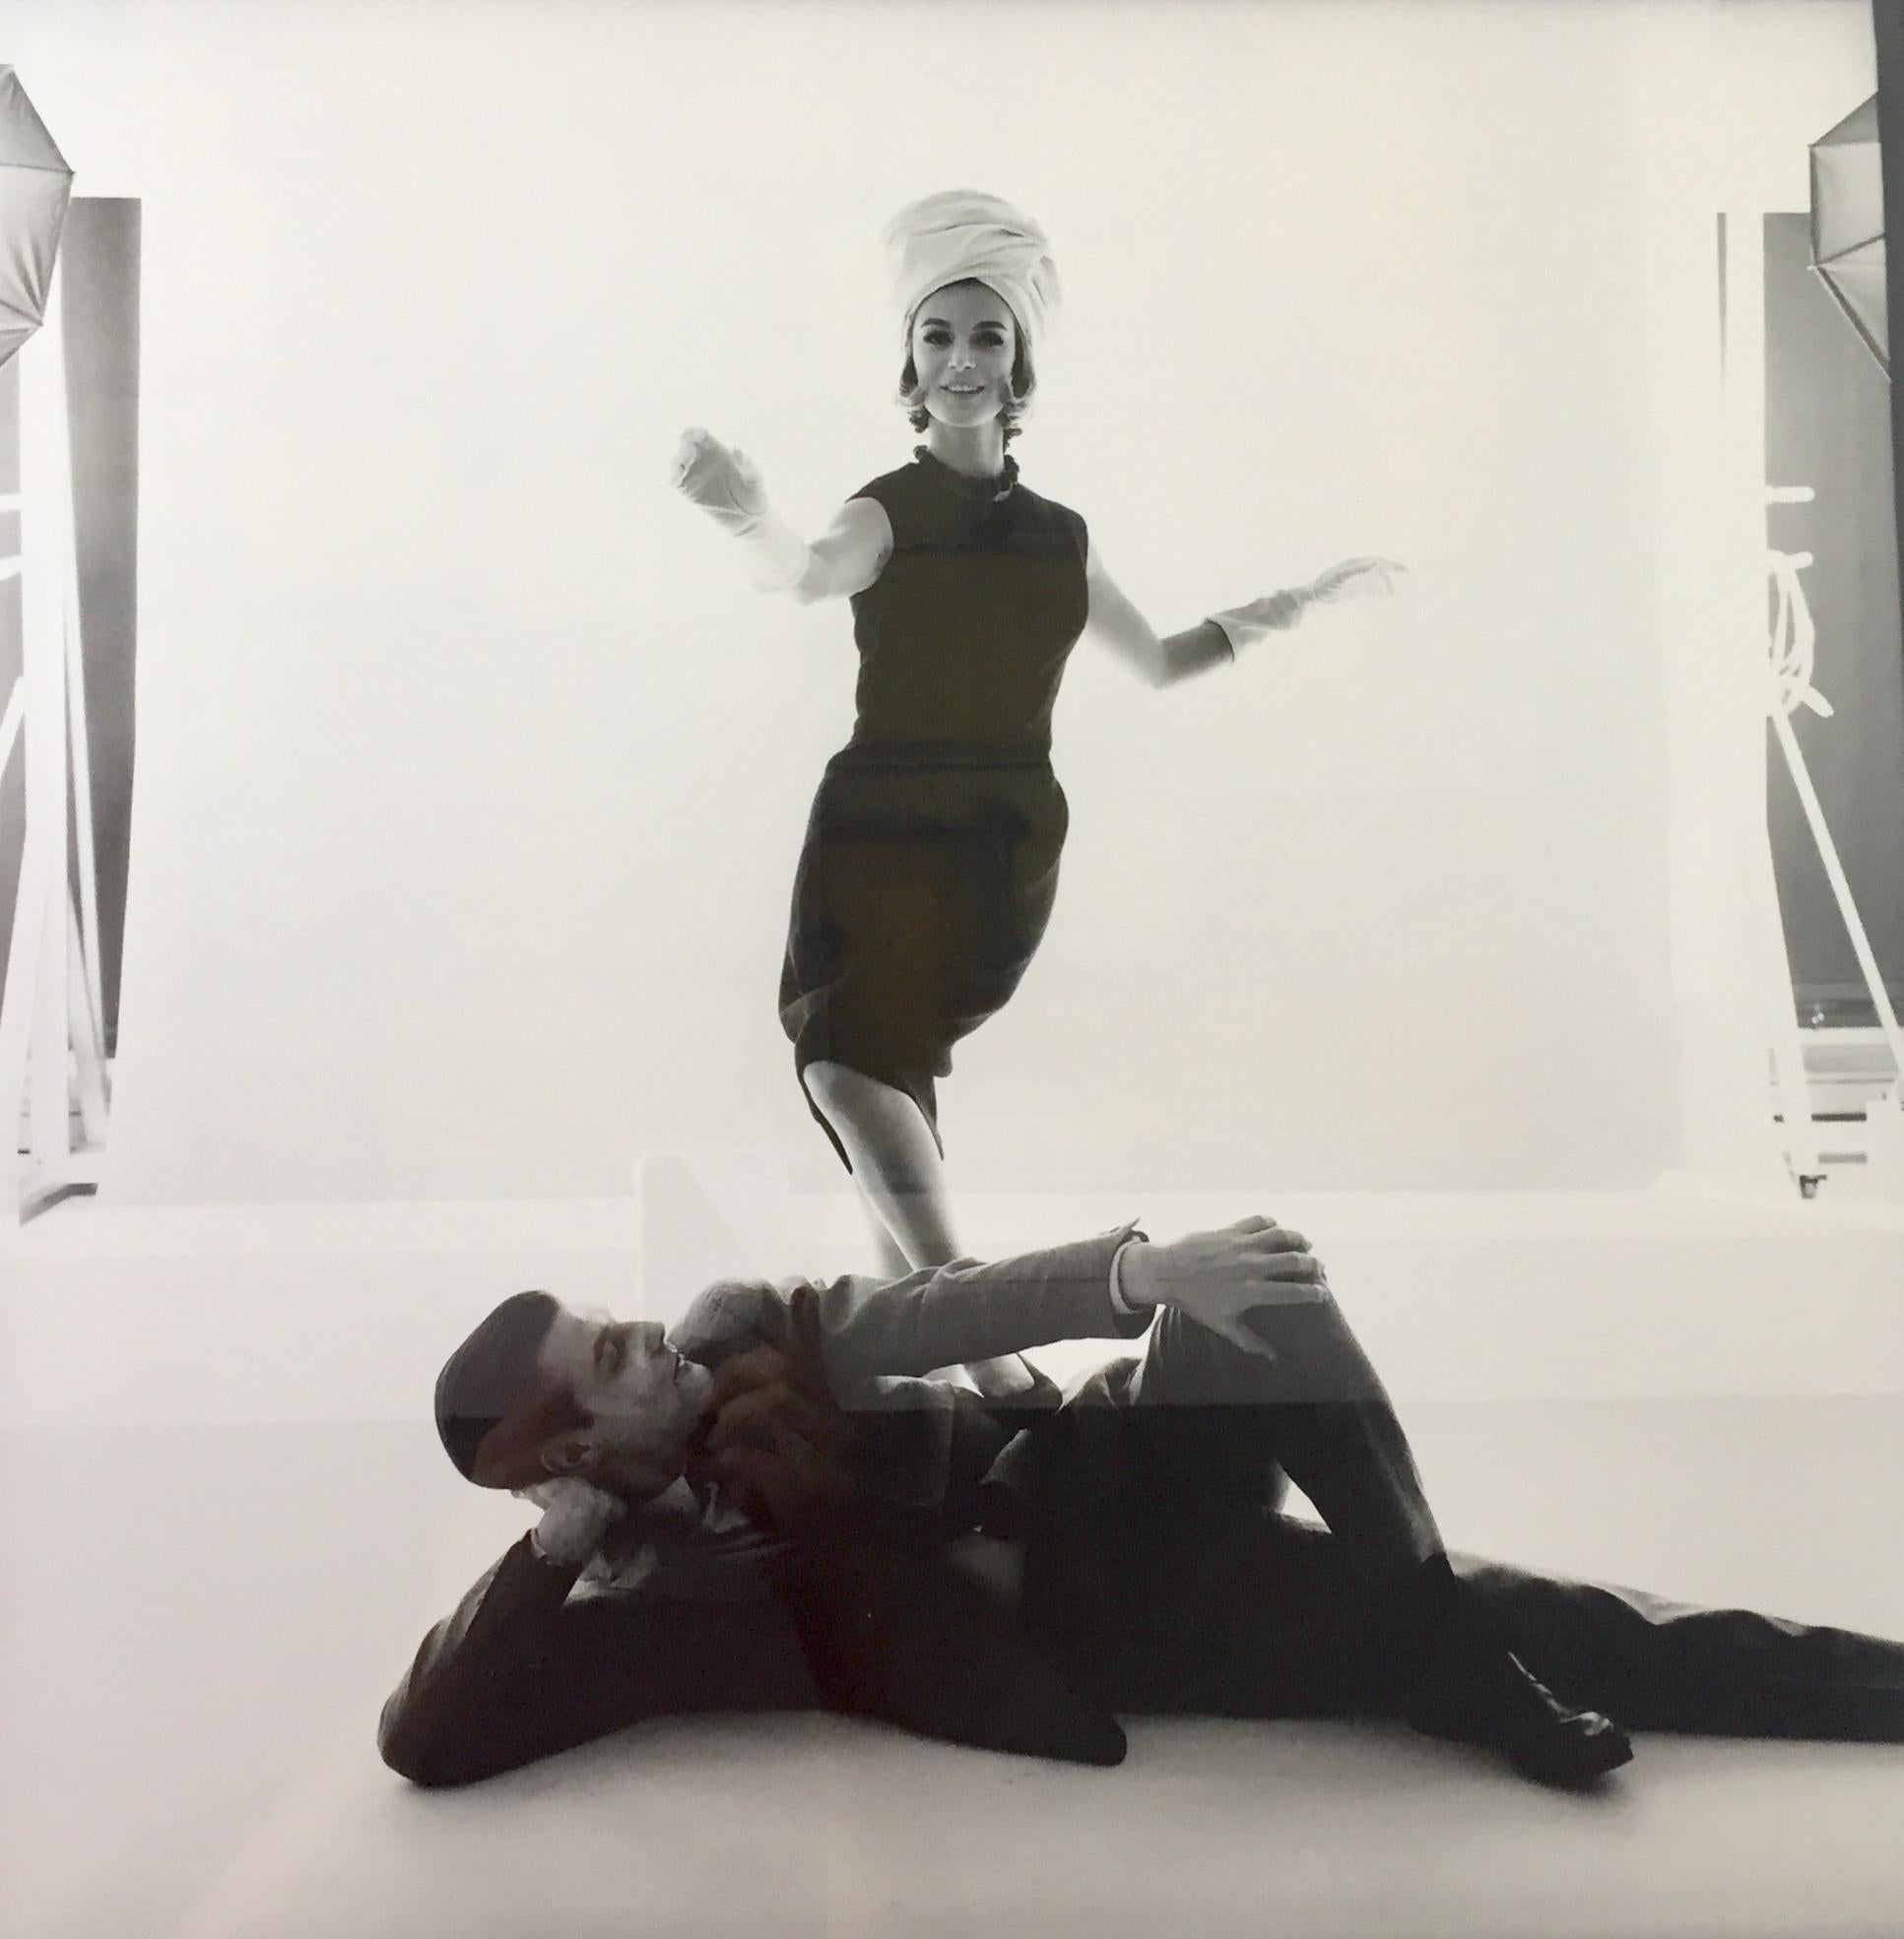 The Pianist Peter Duchin Posing with Model (i), 1963 - Photograph by Bert Stern